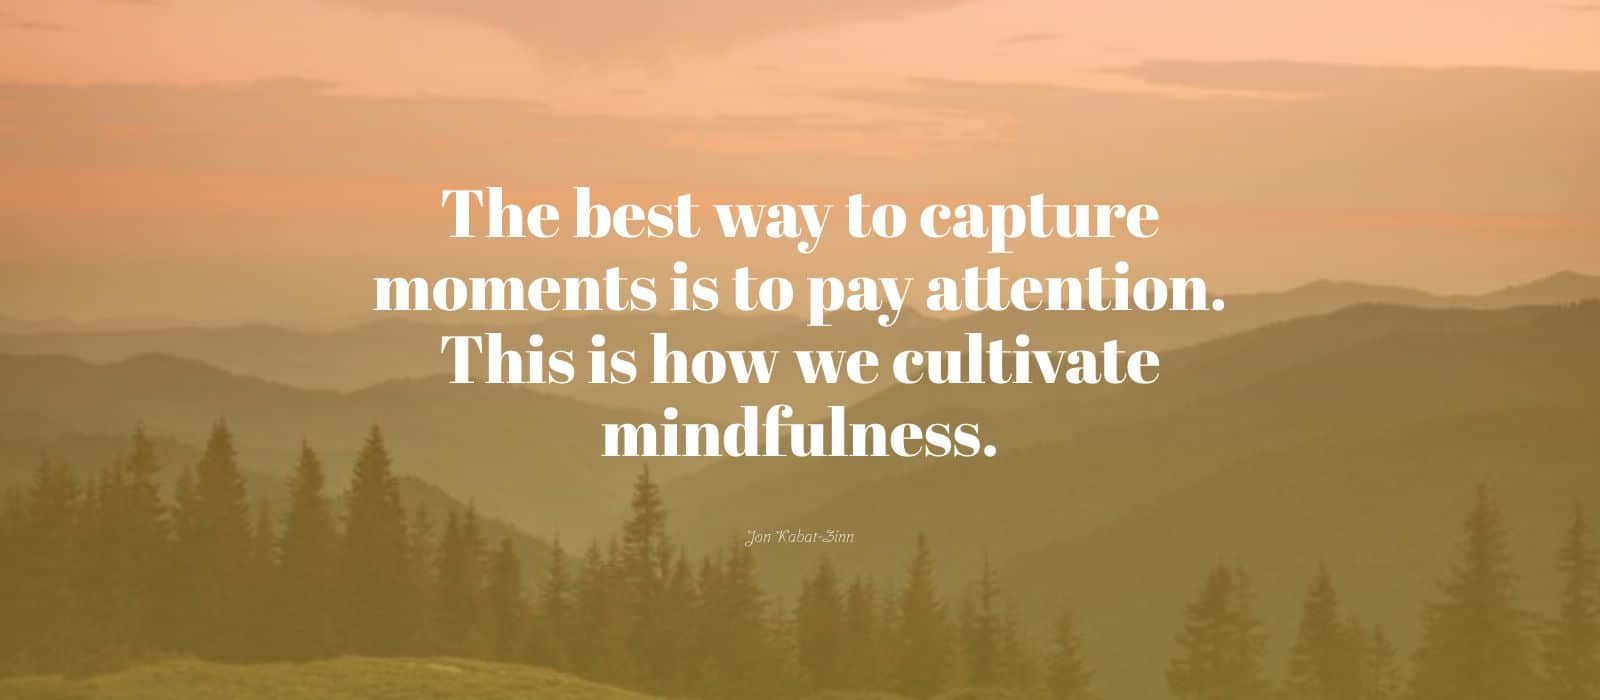 How To Use Mindfulness To Increase Your Awareness - The Joy Within